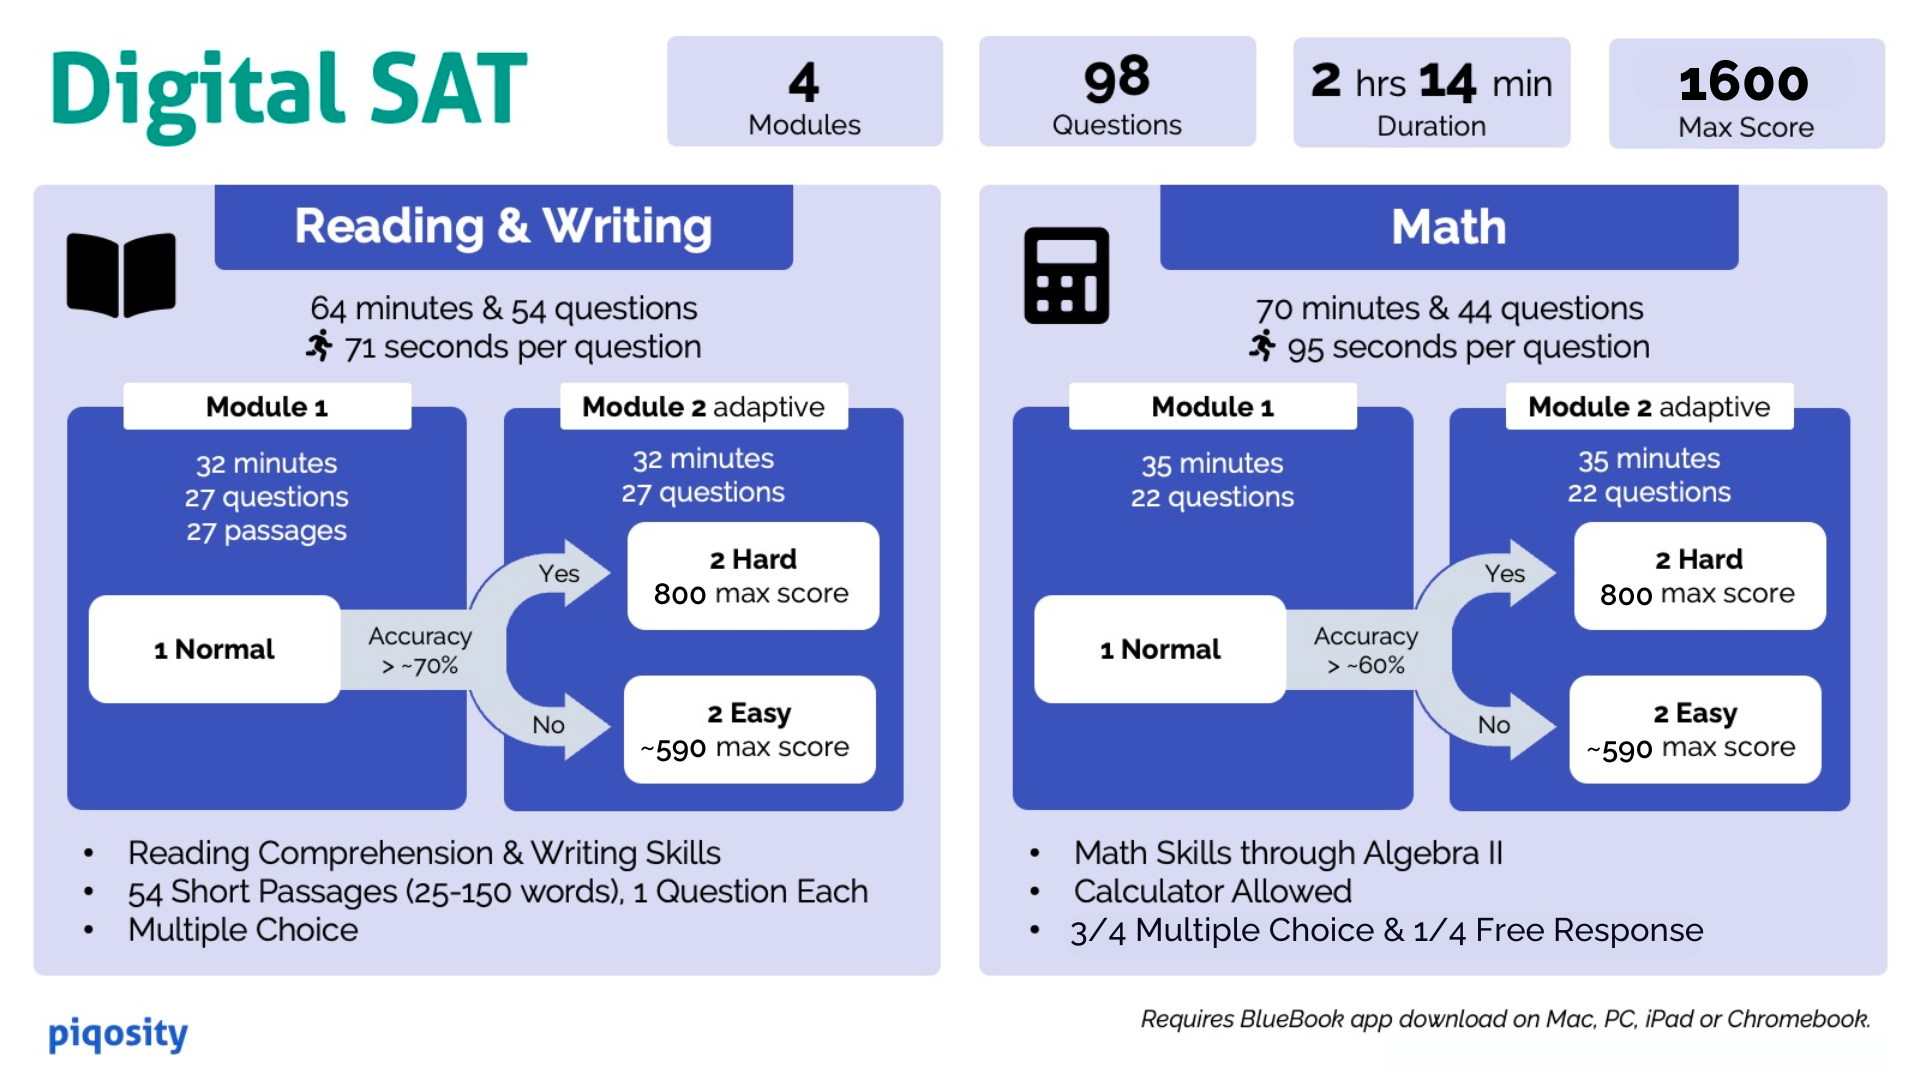 Digital SAT information including modules, timing, and other data.